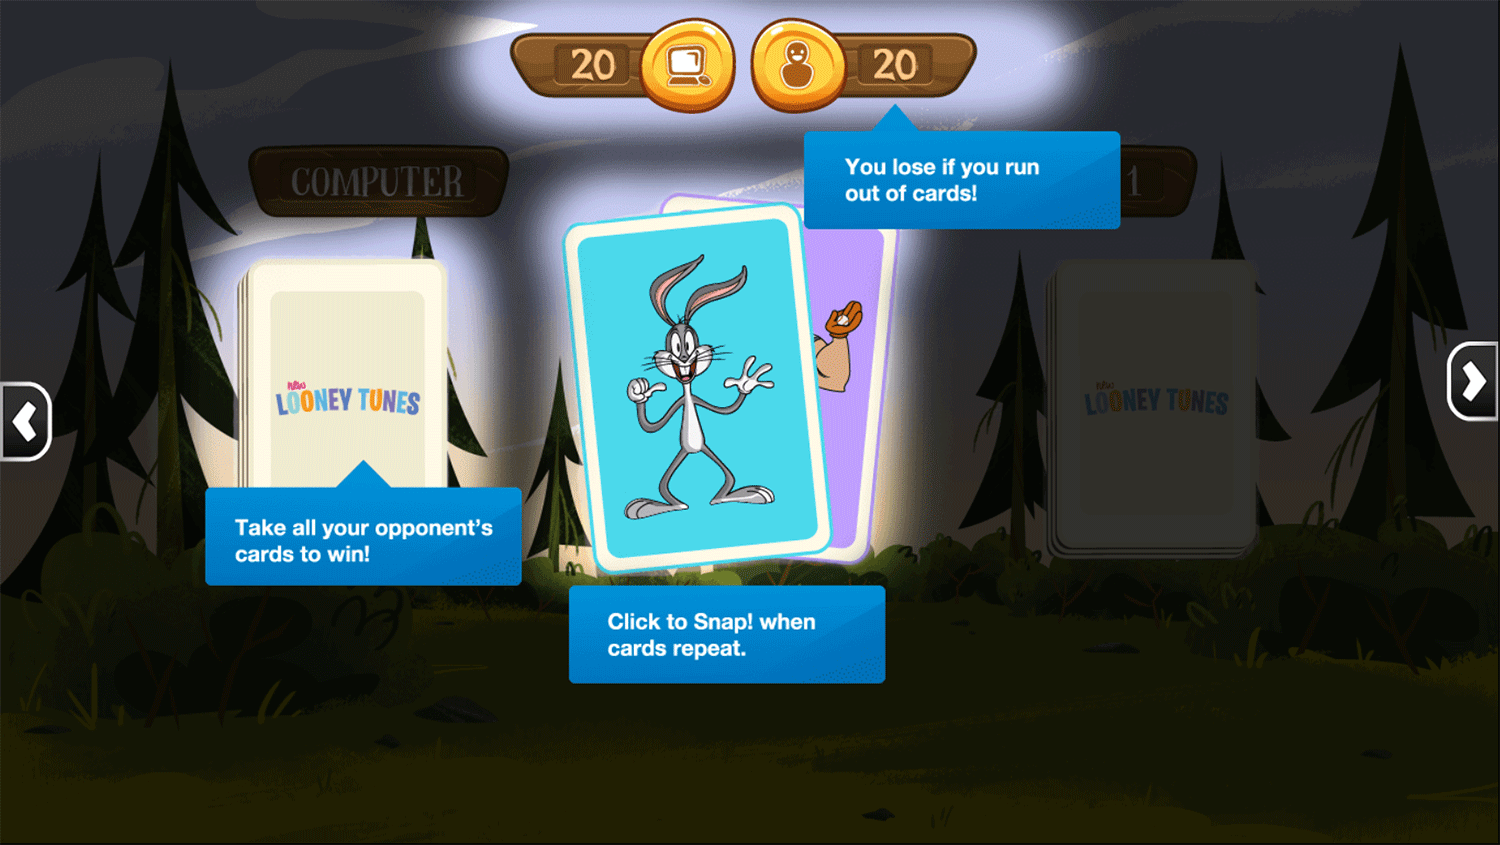 New Looney Tunes Snap Game How To Play Screenshot.